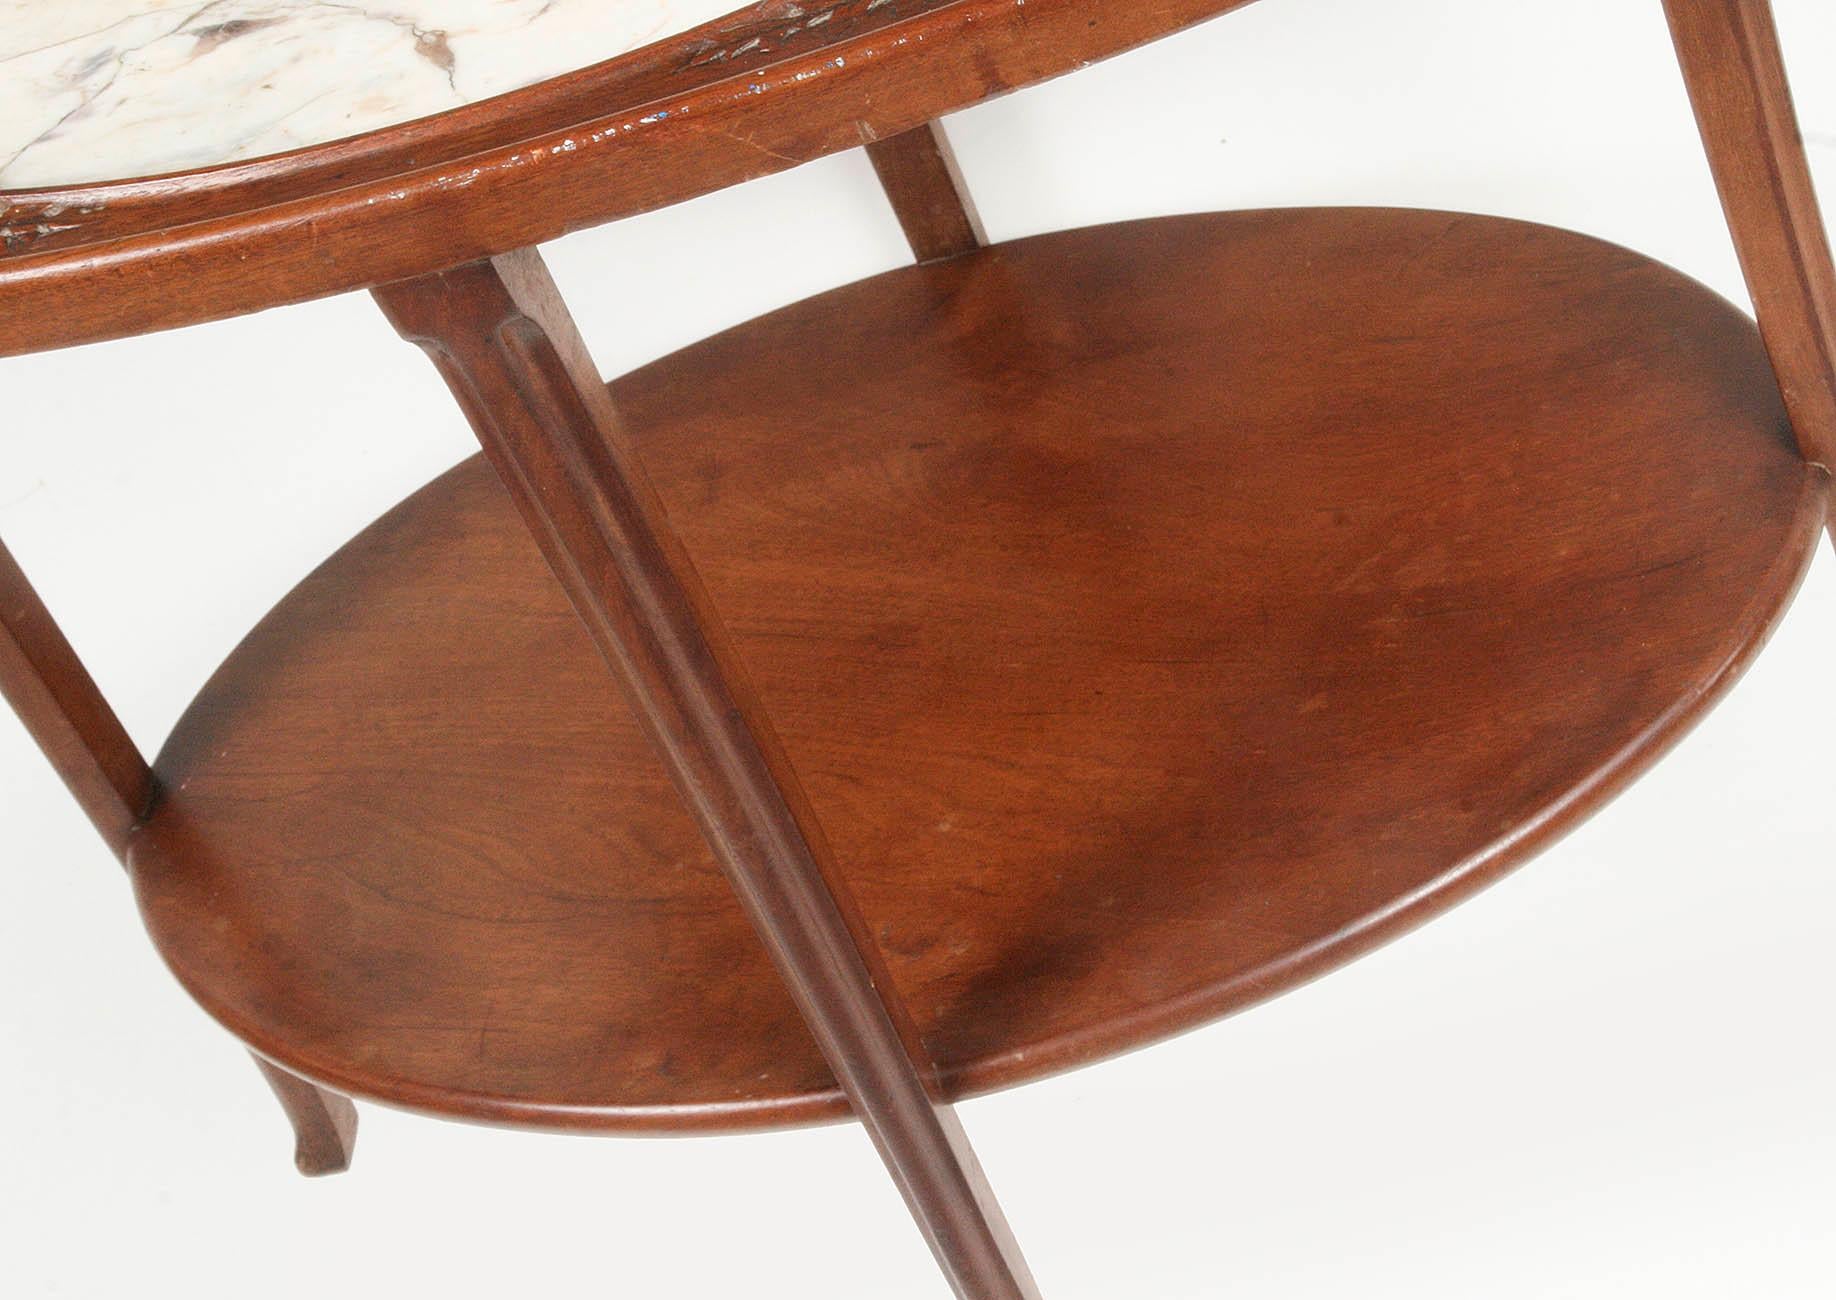 French Mahogany Side Table Art Nouveau with Brescia Violet Marble Top For Sale 2